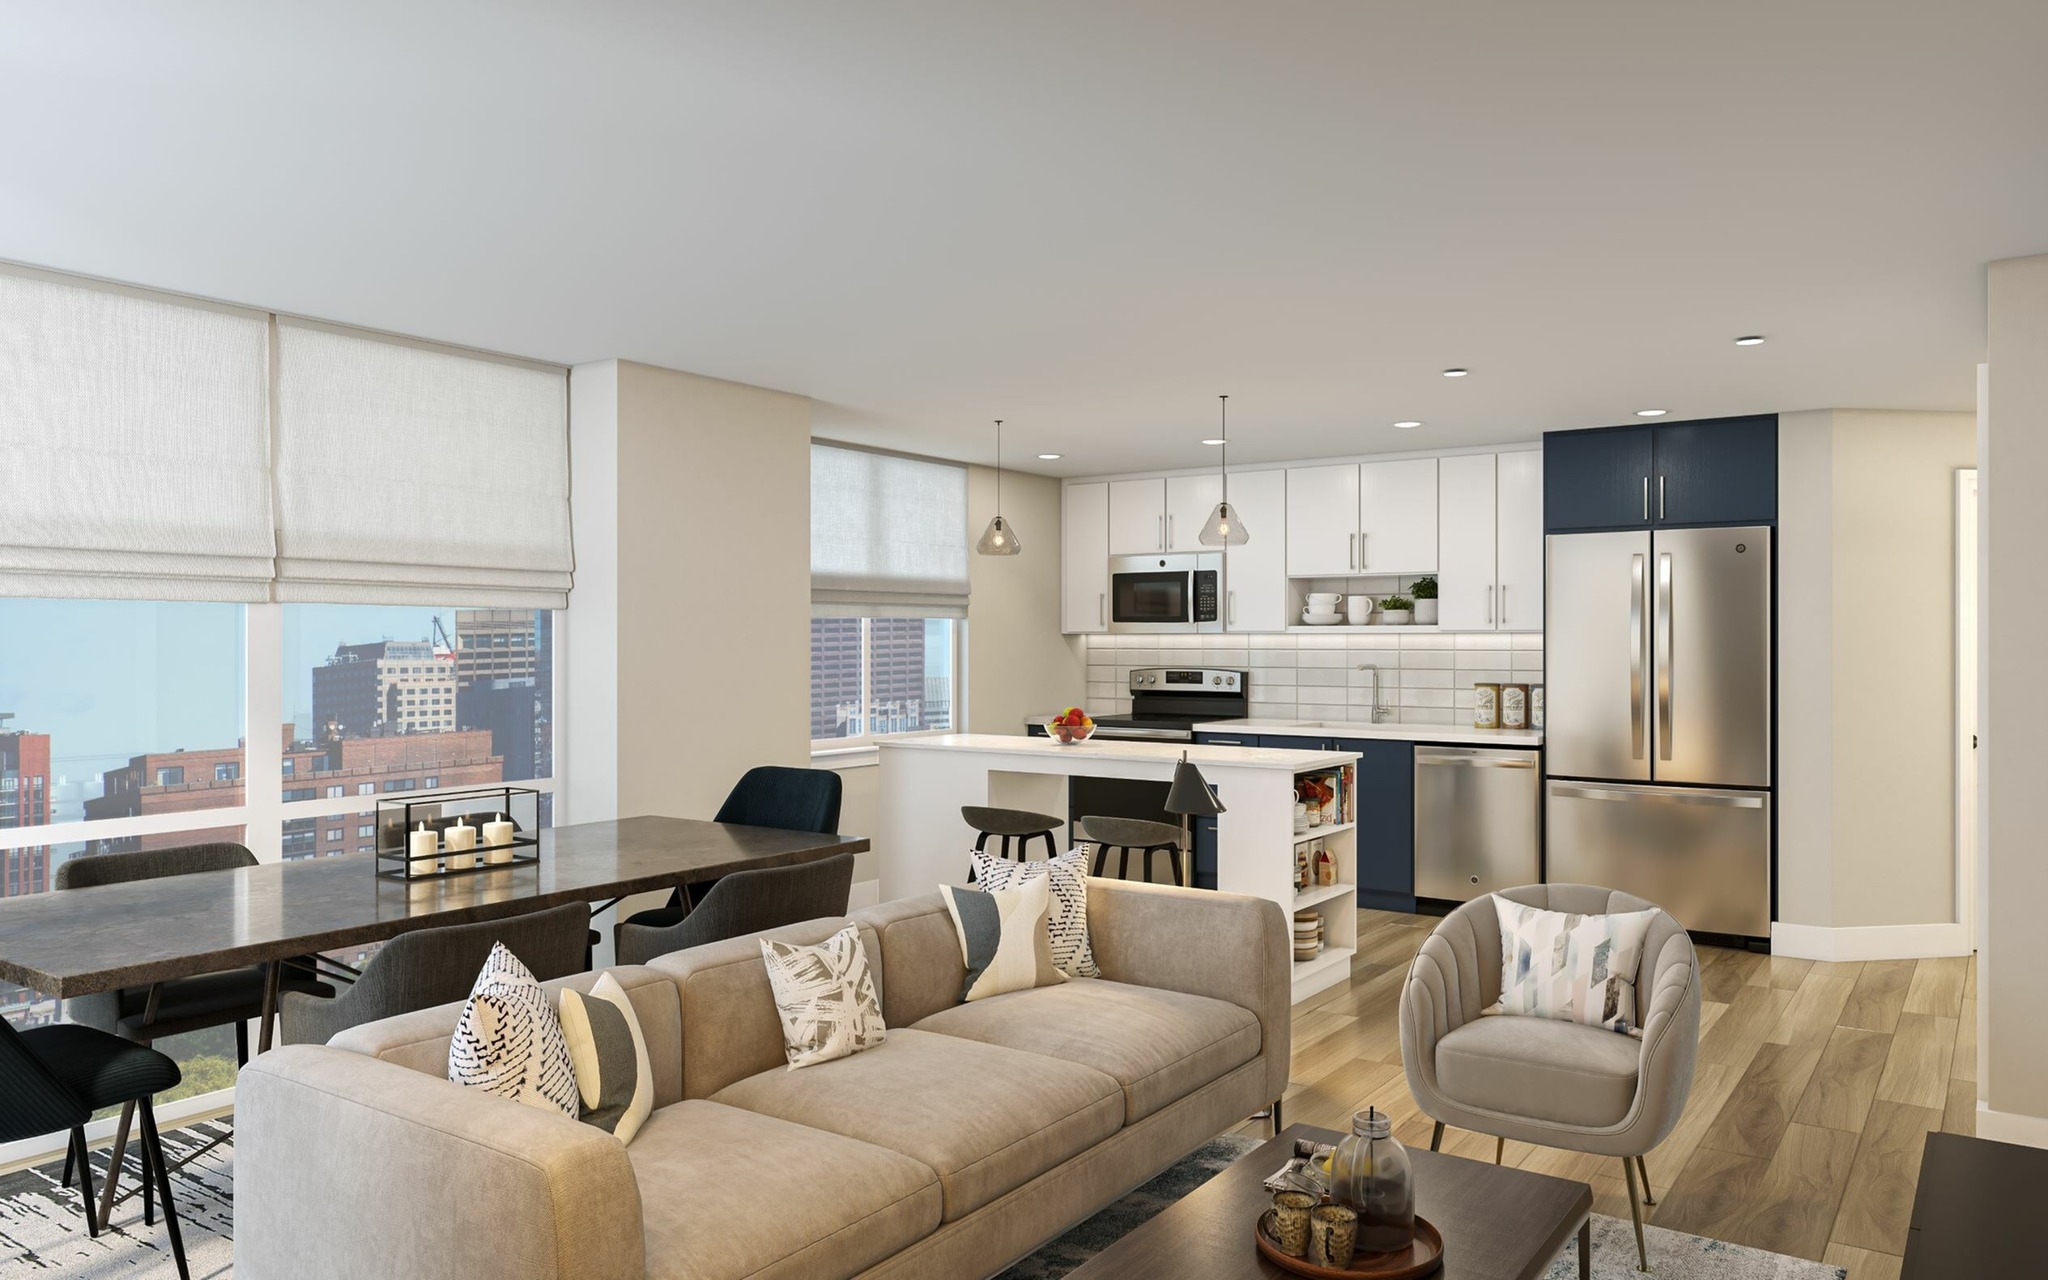 Contemporary Kitchens With Quartz Countertops, Two-Tone Cabinetry, Under-Cabinet Lighting, Energy-Efficient Stainless Steel Appliances & Islands | Meridian 2250 at Eisenhower Station | Luxury Alexandria VA Apartments